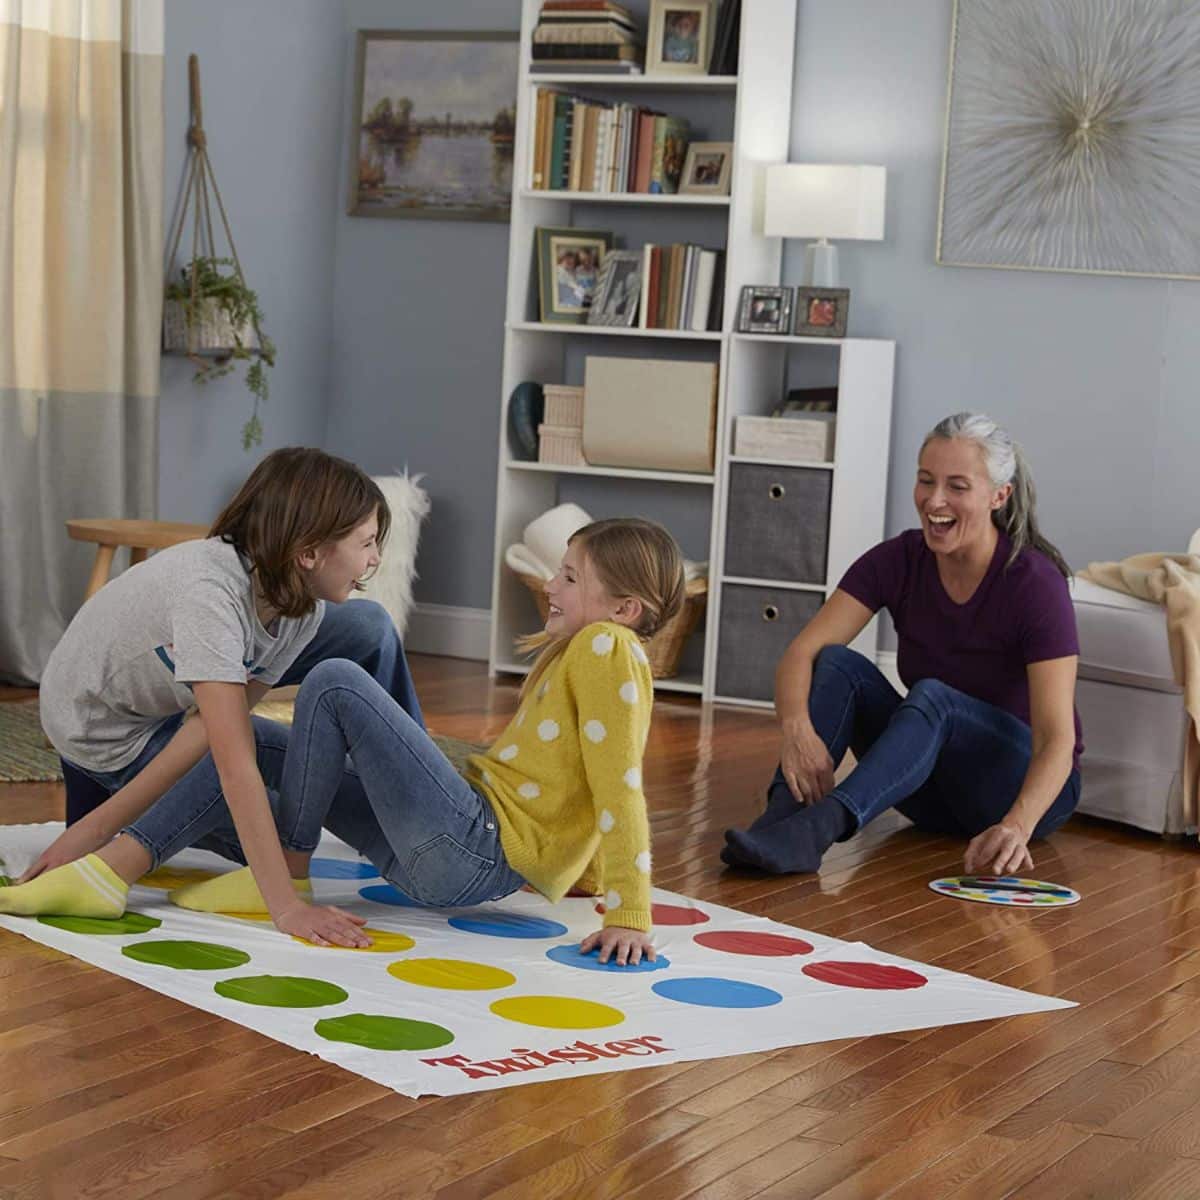 Mother and two kids playing a twister game in the living room.